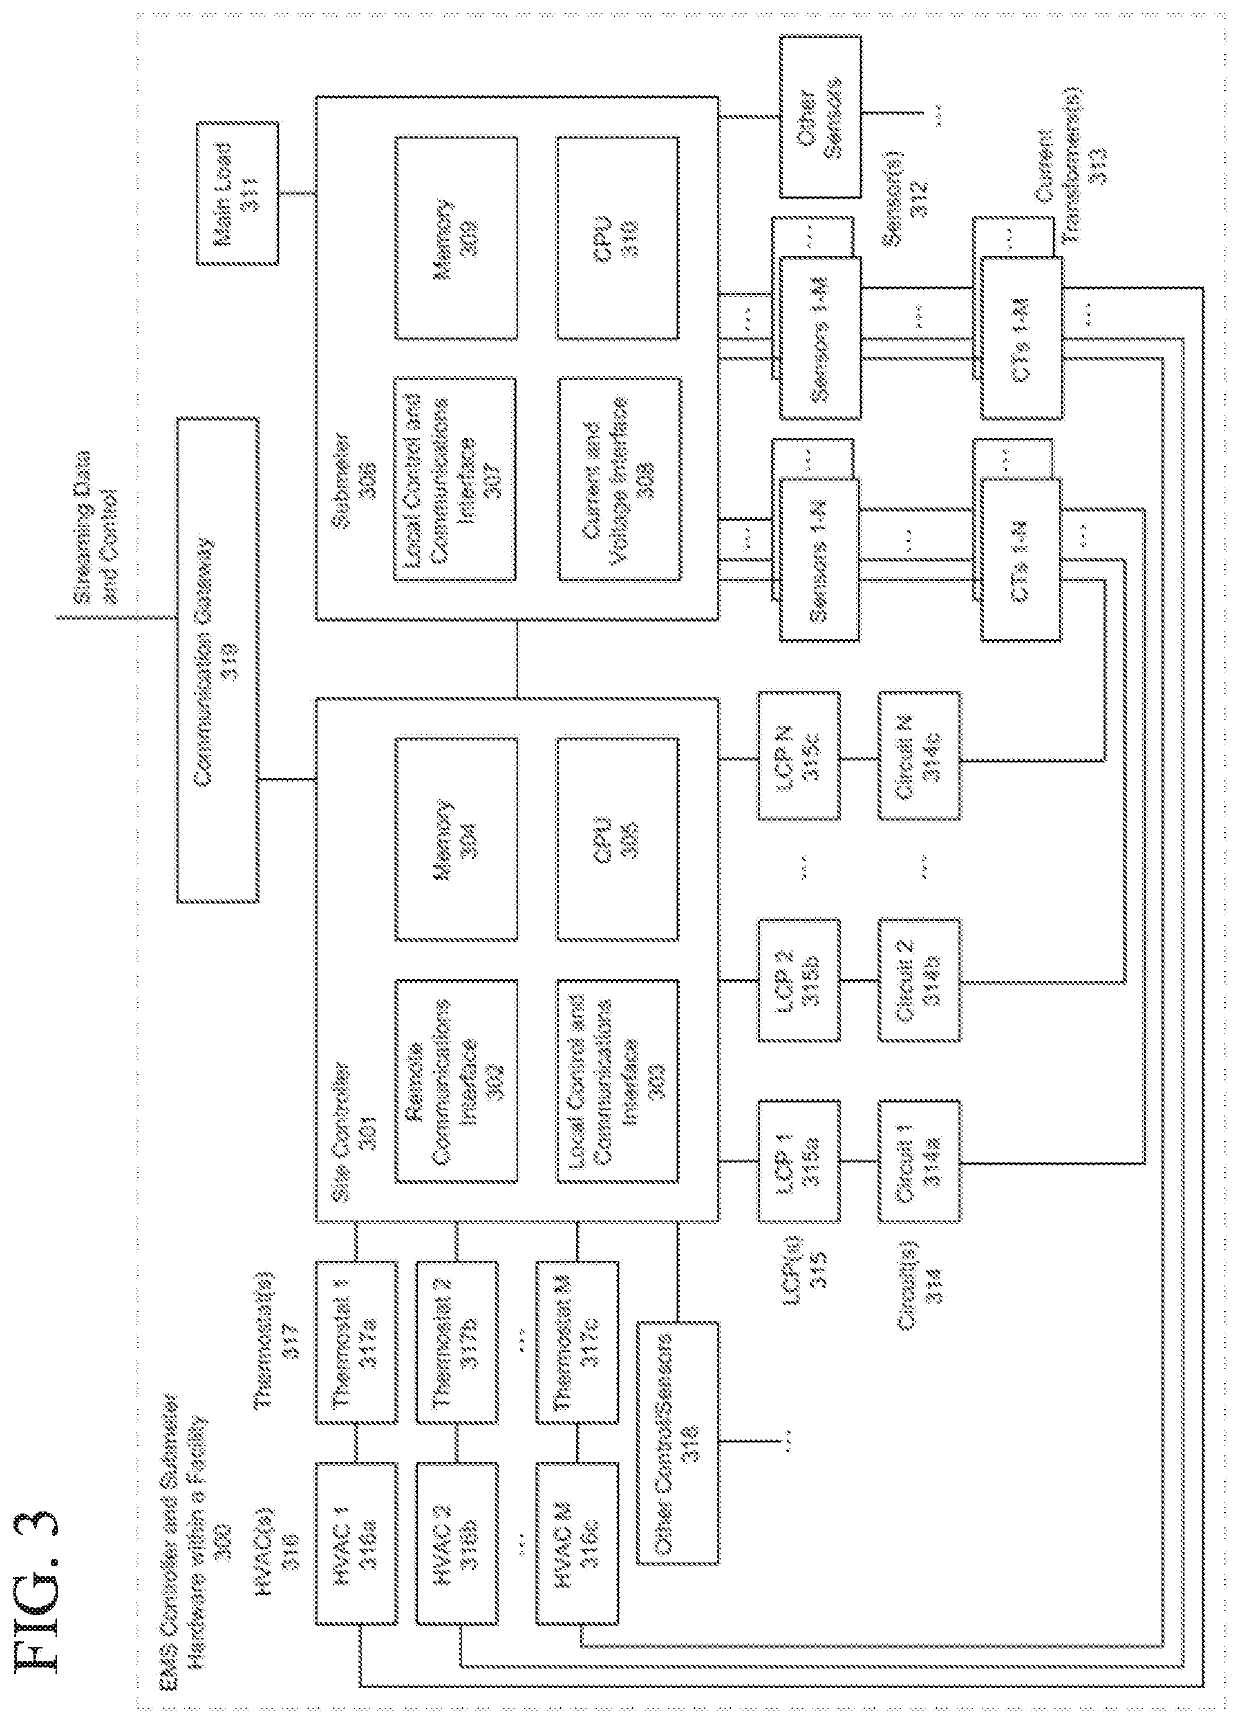 Real time energy consumption management of appliances, devices, and equipment used in high-touch and on-demand services and operations